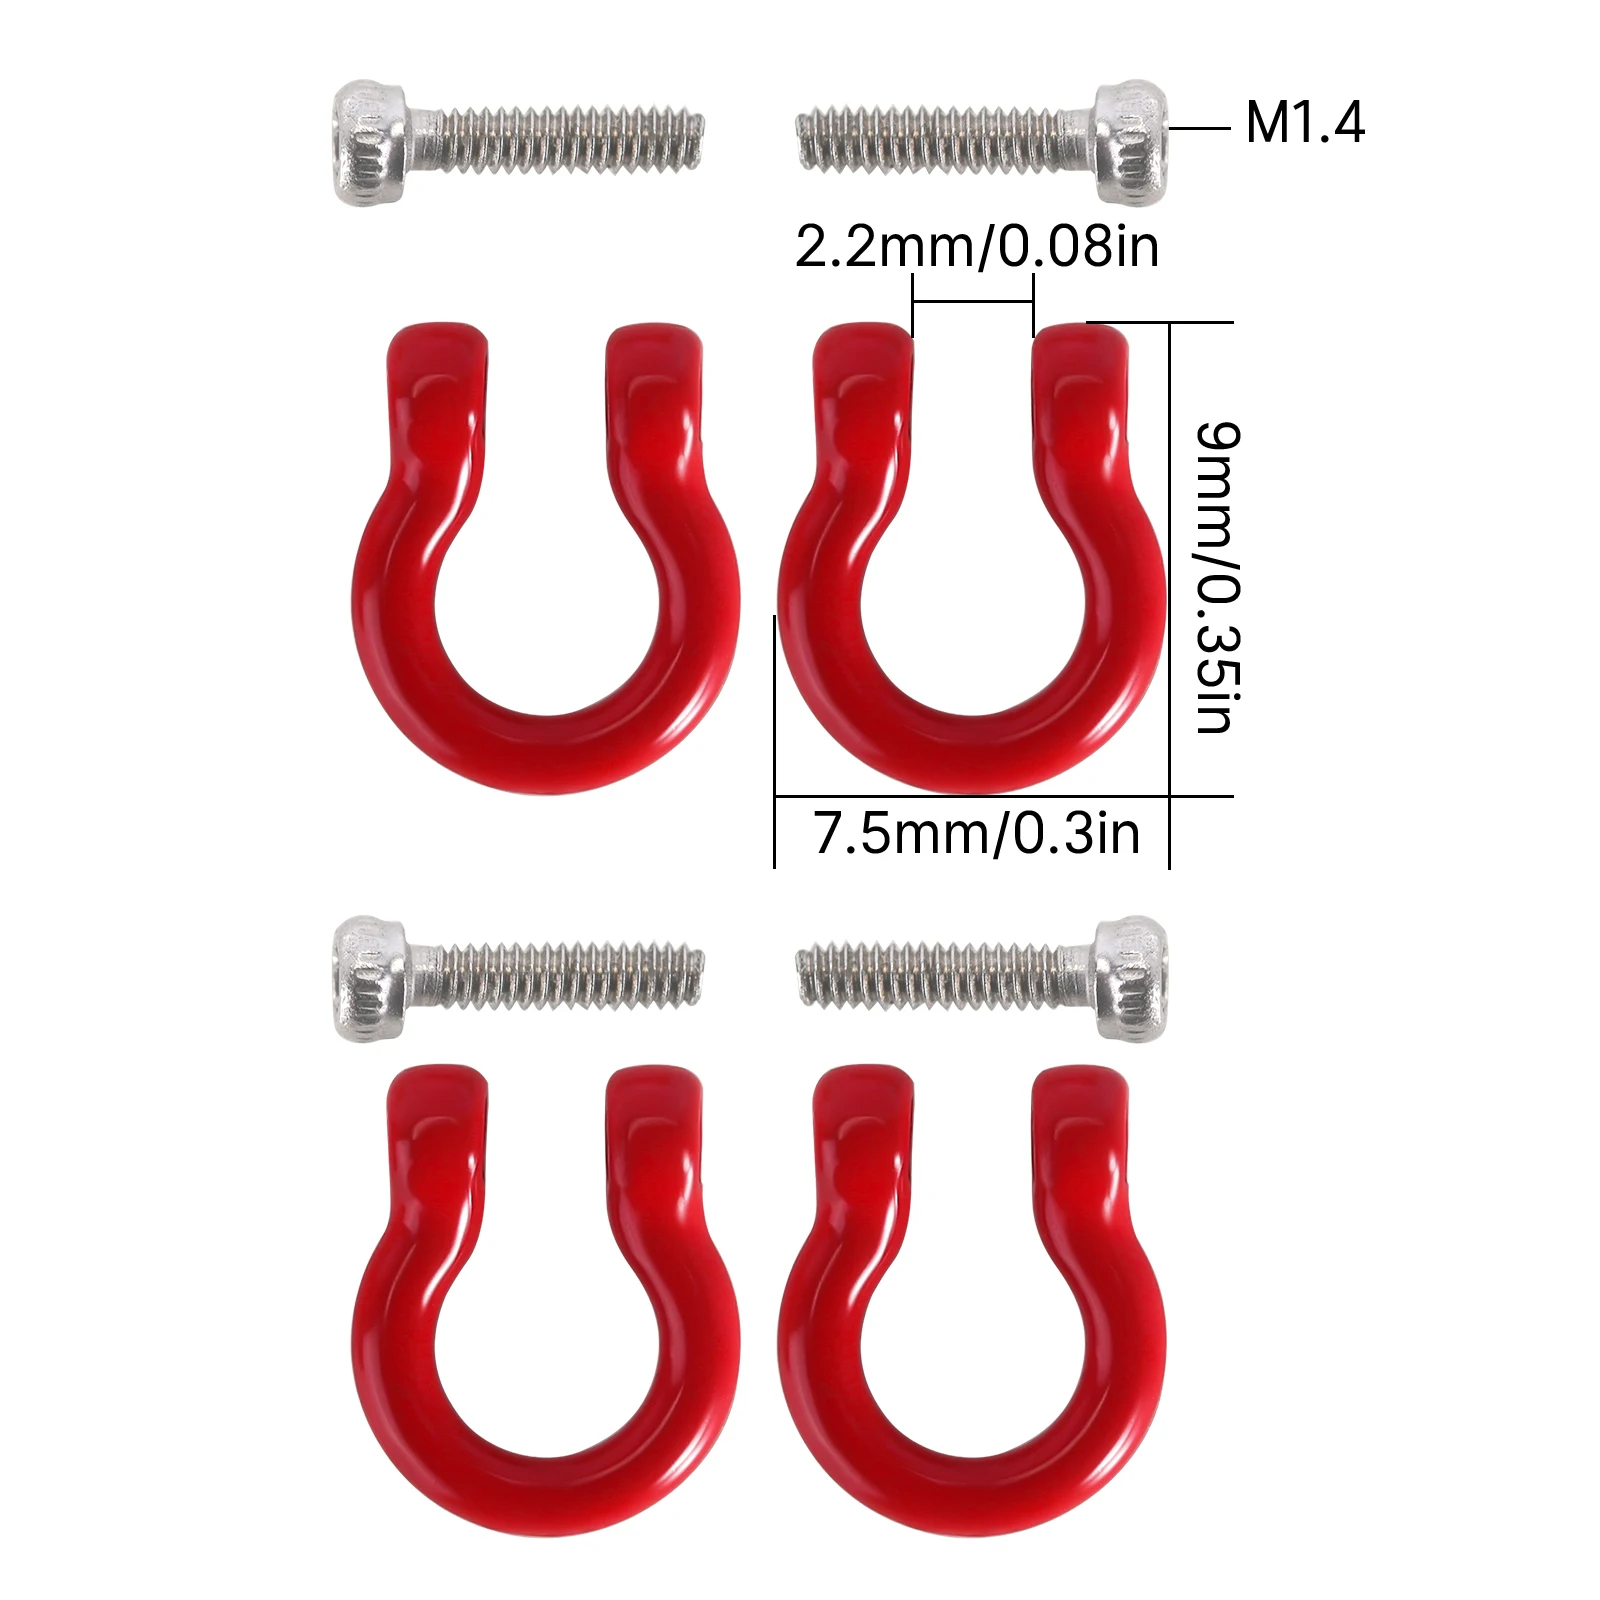 INJORA-D-Rings-Tow-Hooks-With-M1-4-Screws-for-FCX18-LC80-TRX4M-Defender-Upgrade.webp